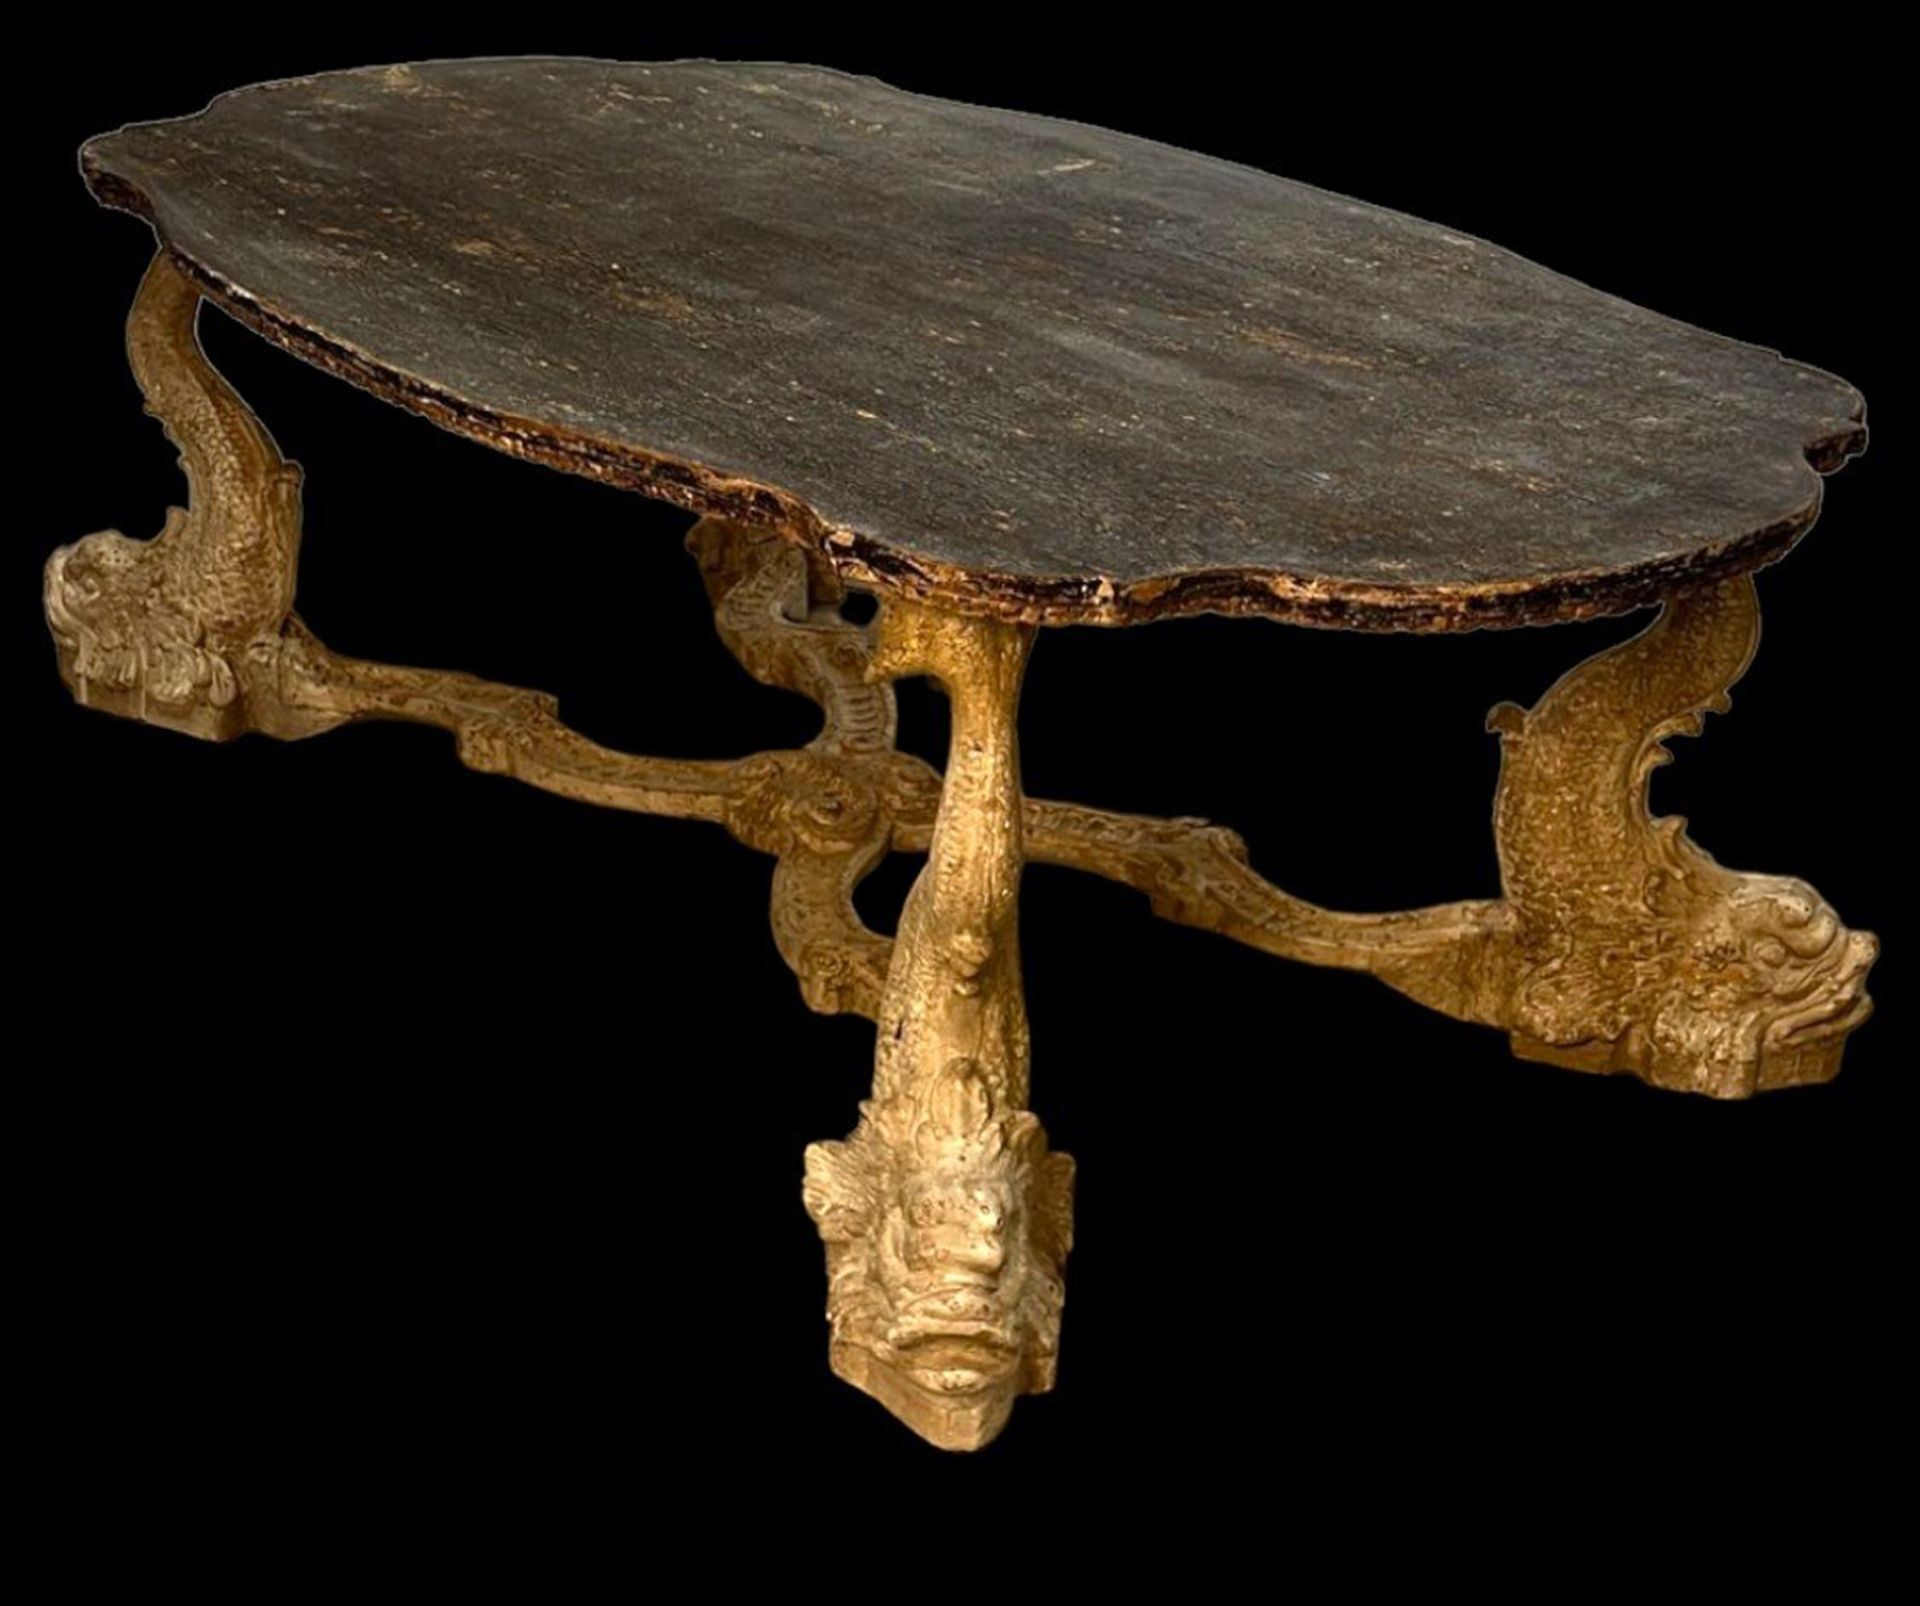 Large Italian Table from the 50s with dolphin legs, Venetian work of the 20th century